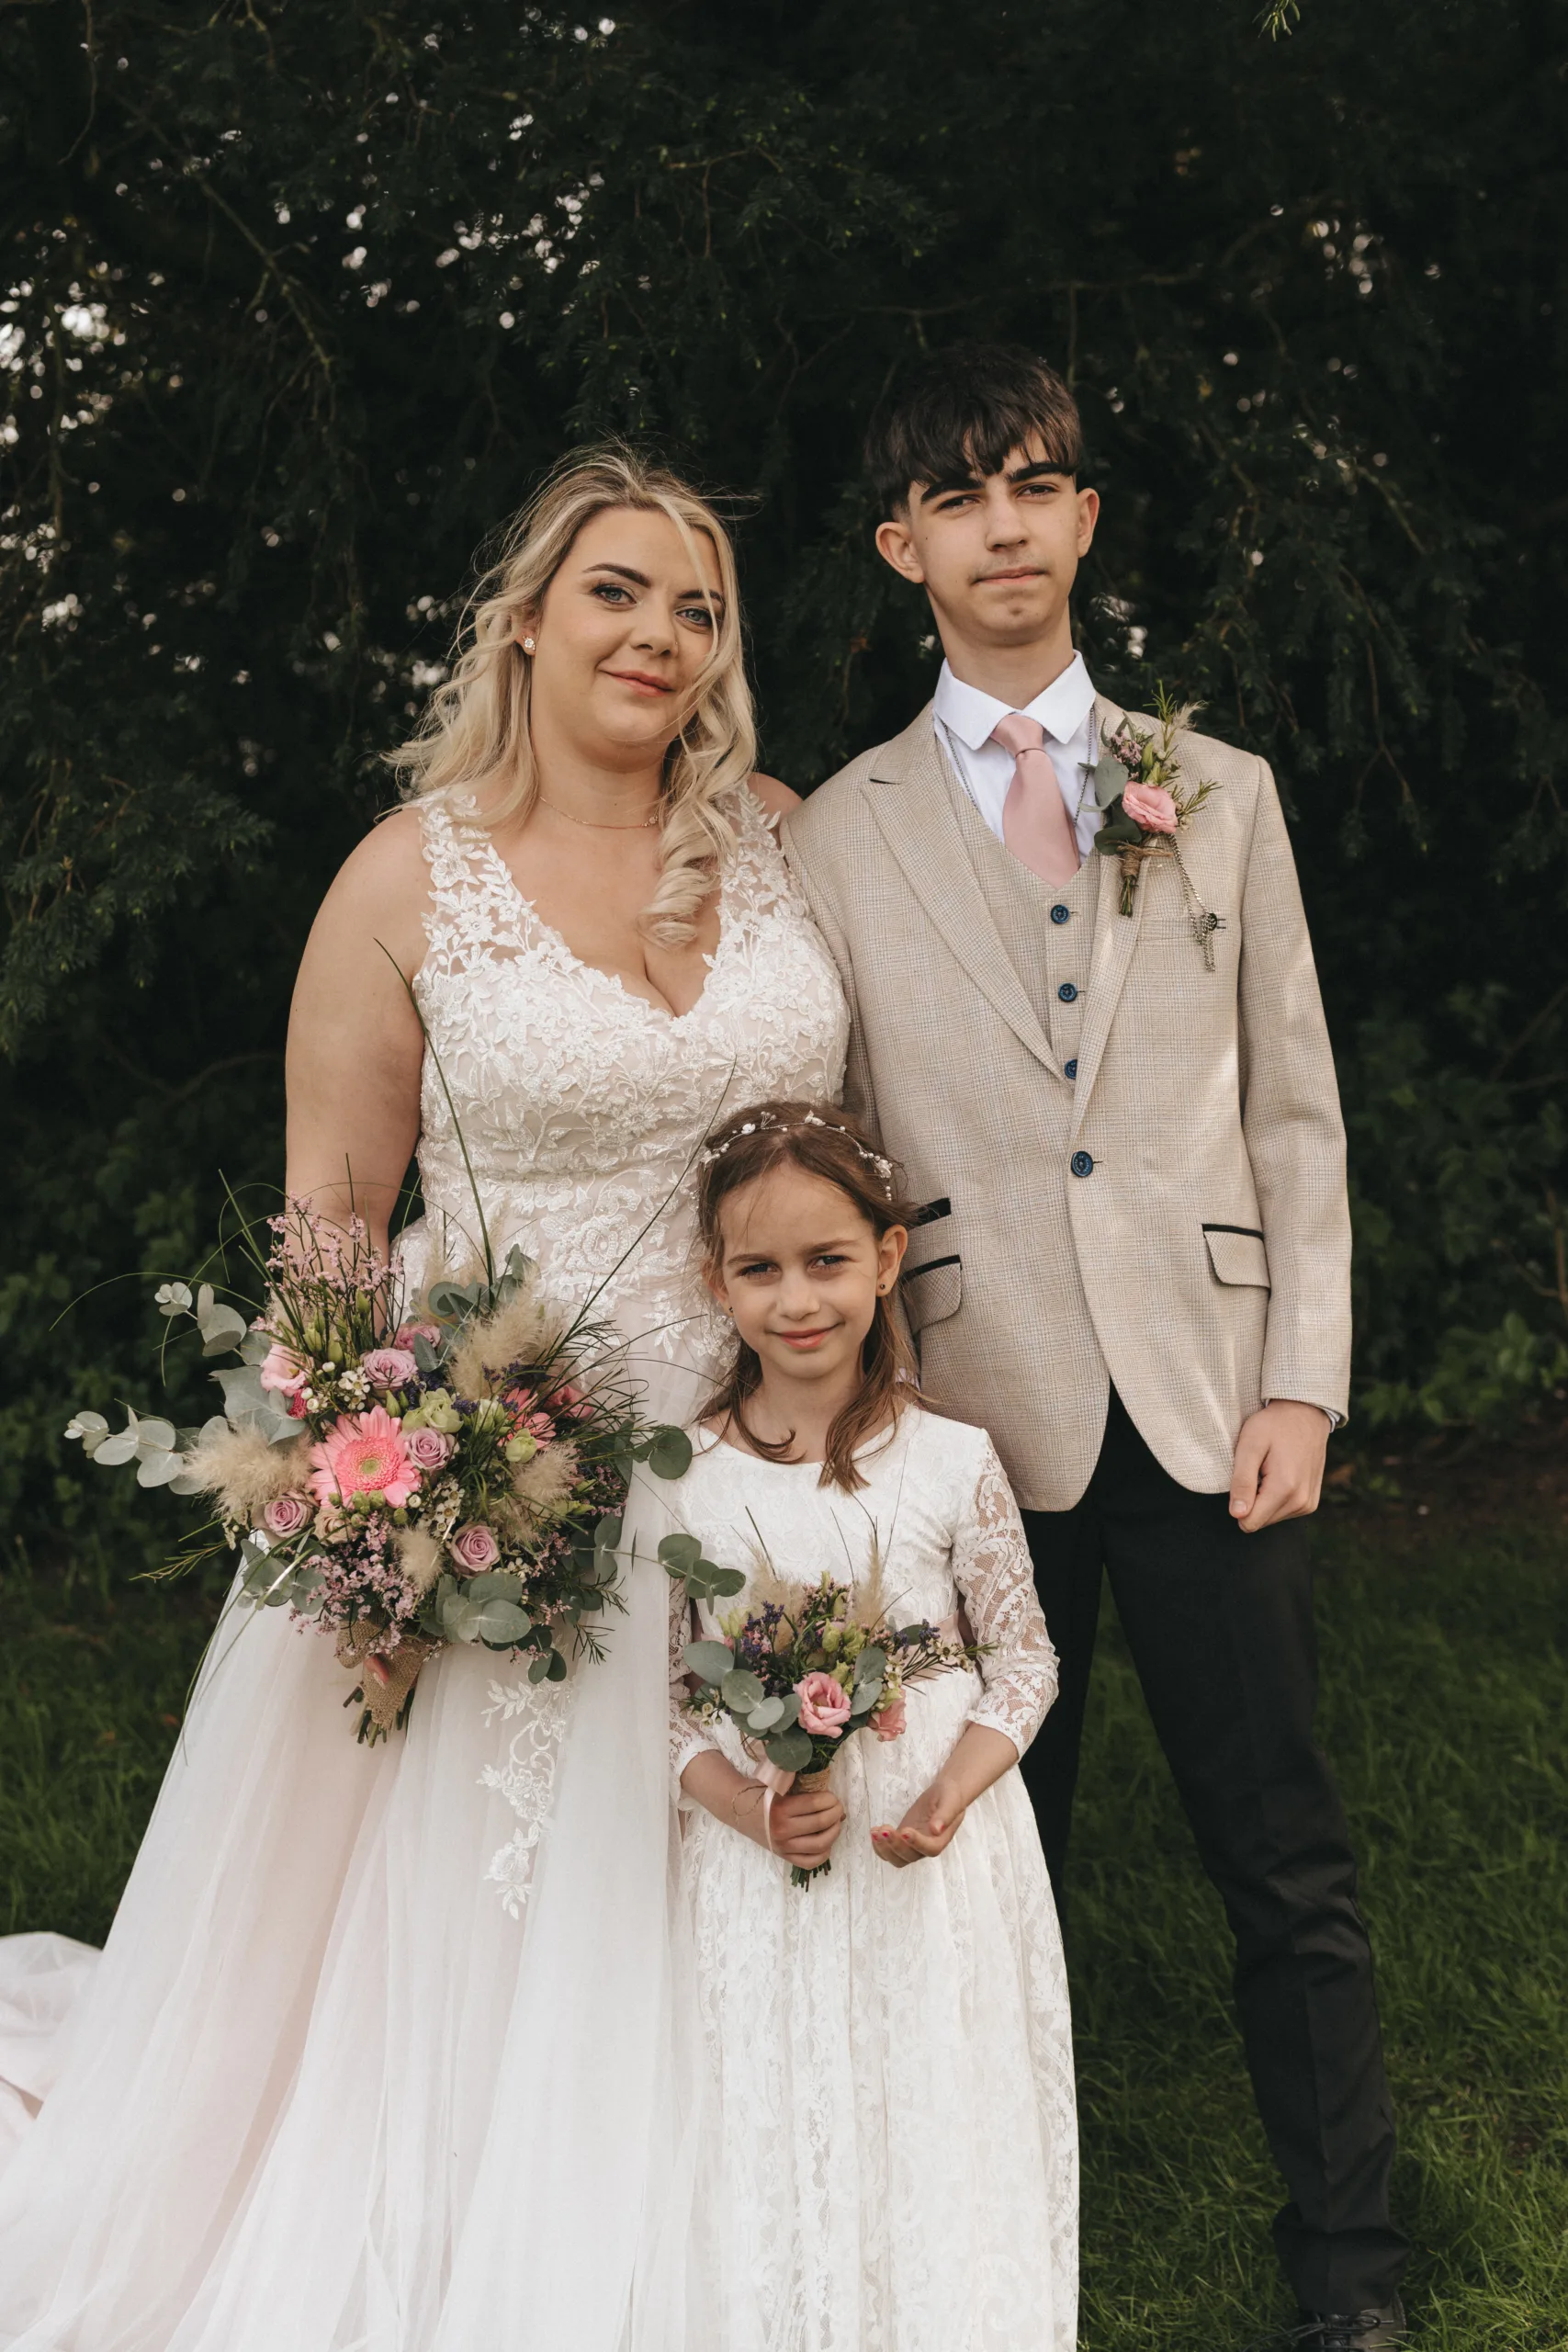 A bride named Pippa, a young girl, and teenage boy named Dan pose outdoors. Pippa wears a white lace gown and holds a large bouquet. Dan sports a light gray suit and